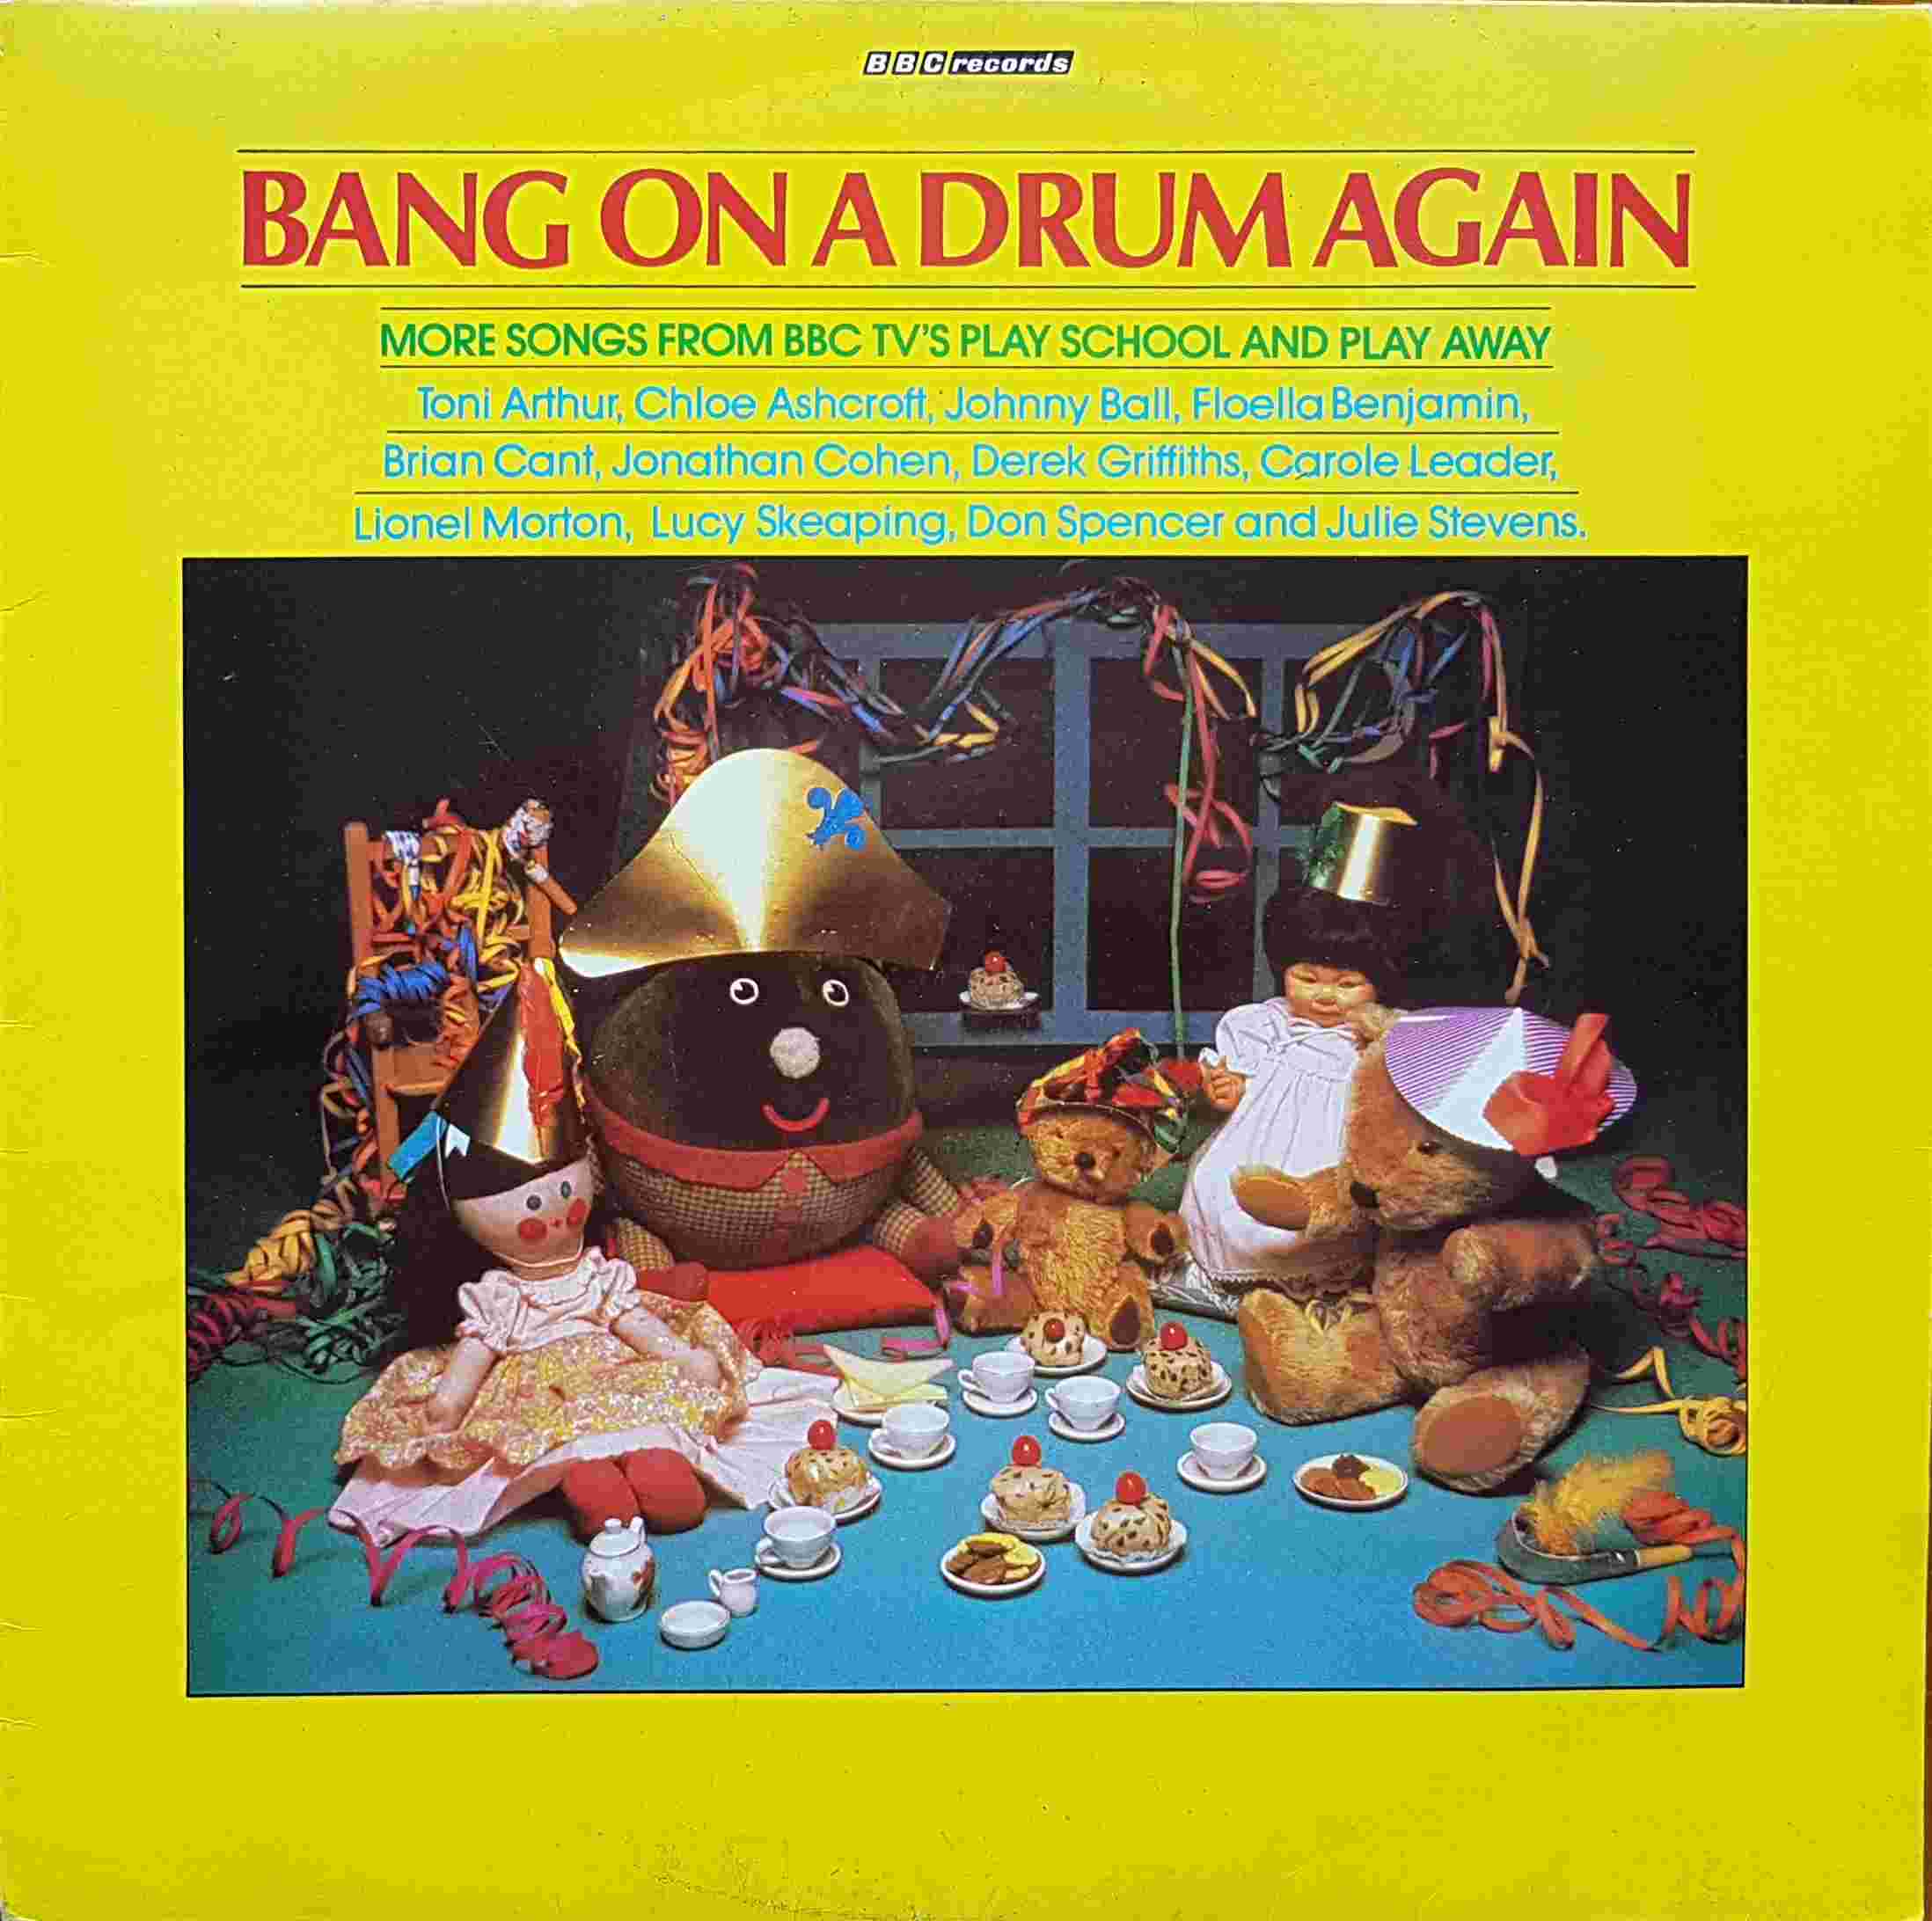 Picture of REC 474 Bang on a drum again by artist Various from the BBC albums - Records and Tapes library